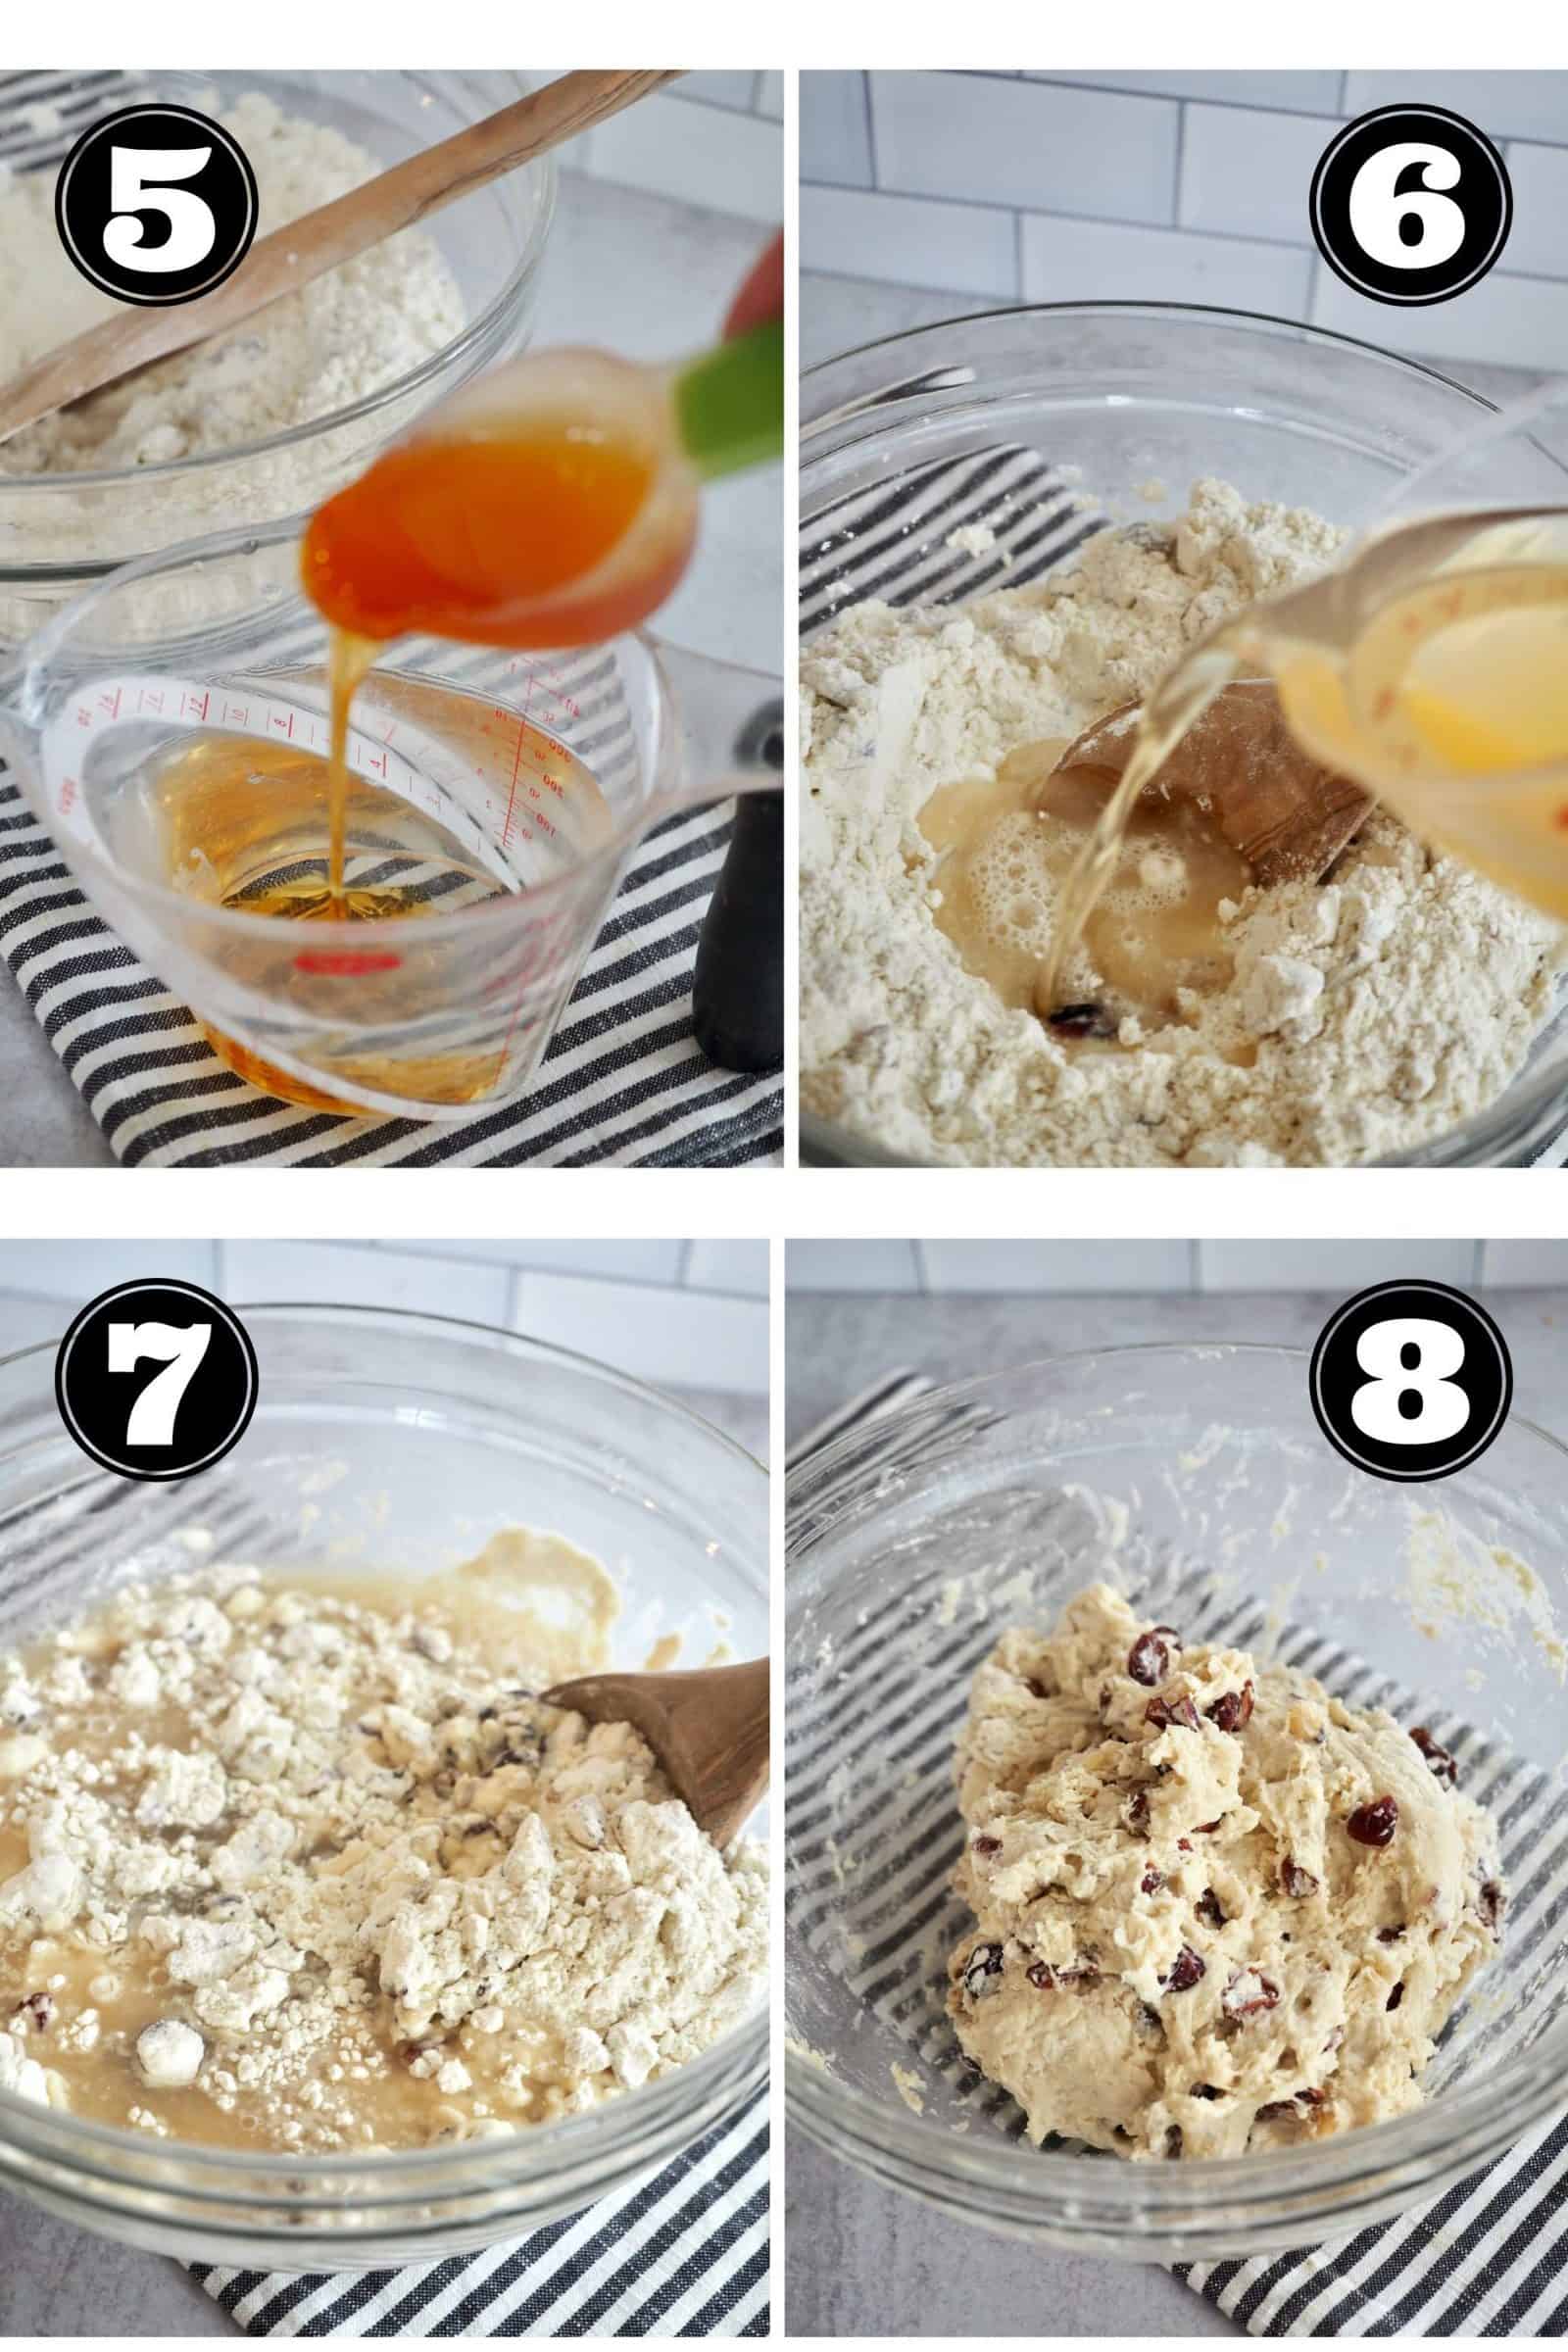 Process shots for no knead bread. 5. pouring honey into warm water. 6. pouring honey water into flour mixture. 7. stirring well with wooden spoon. 8. rustic dough in glass bowl.